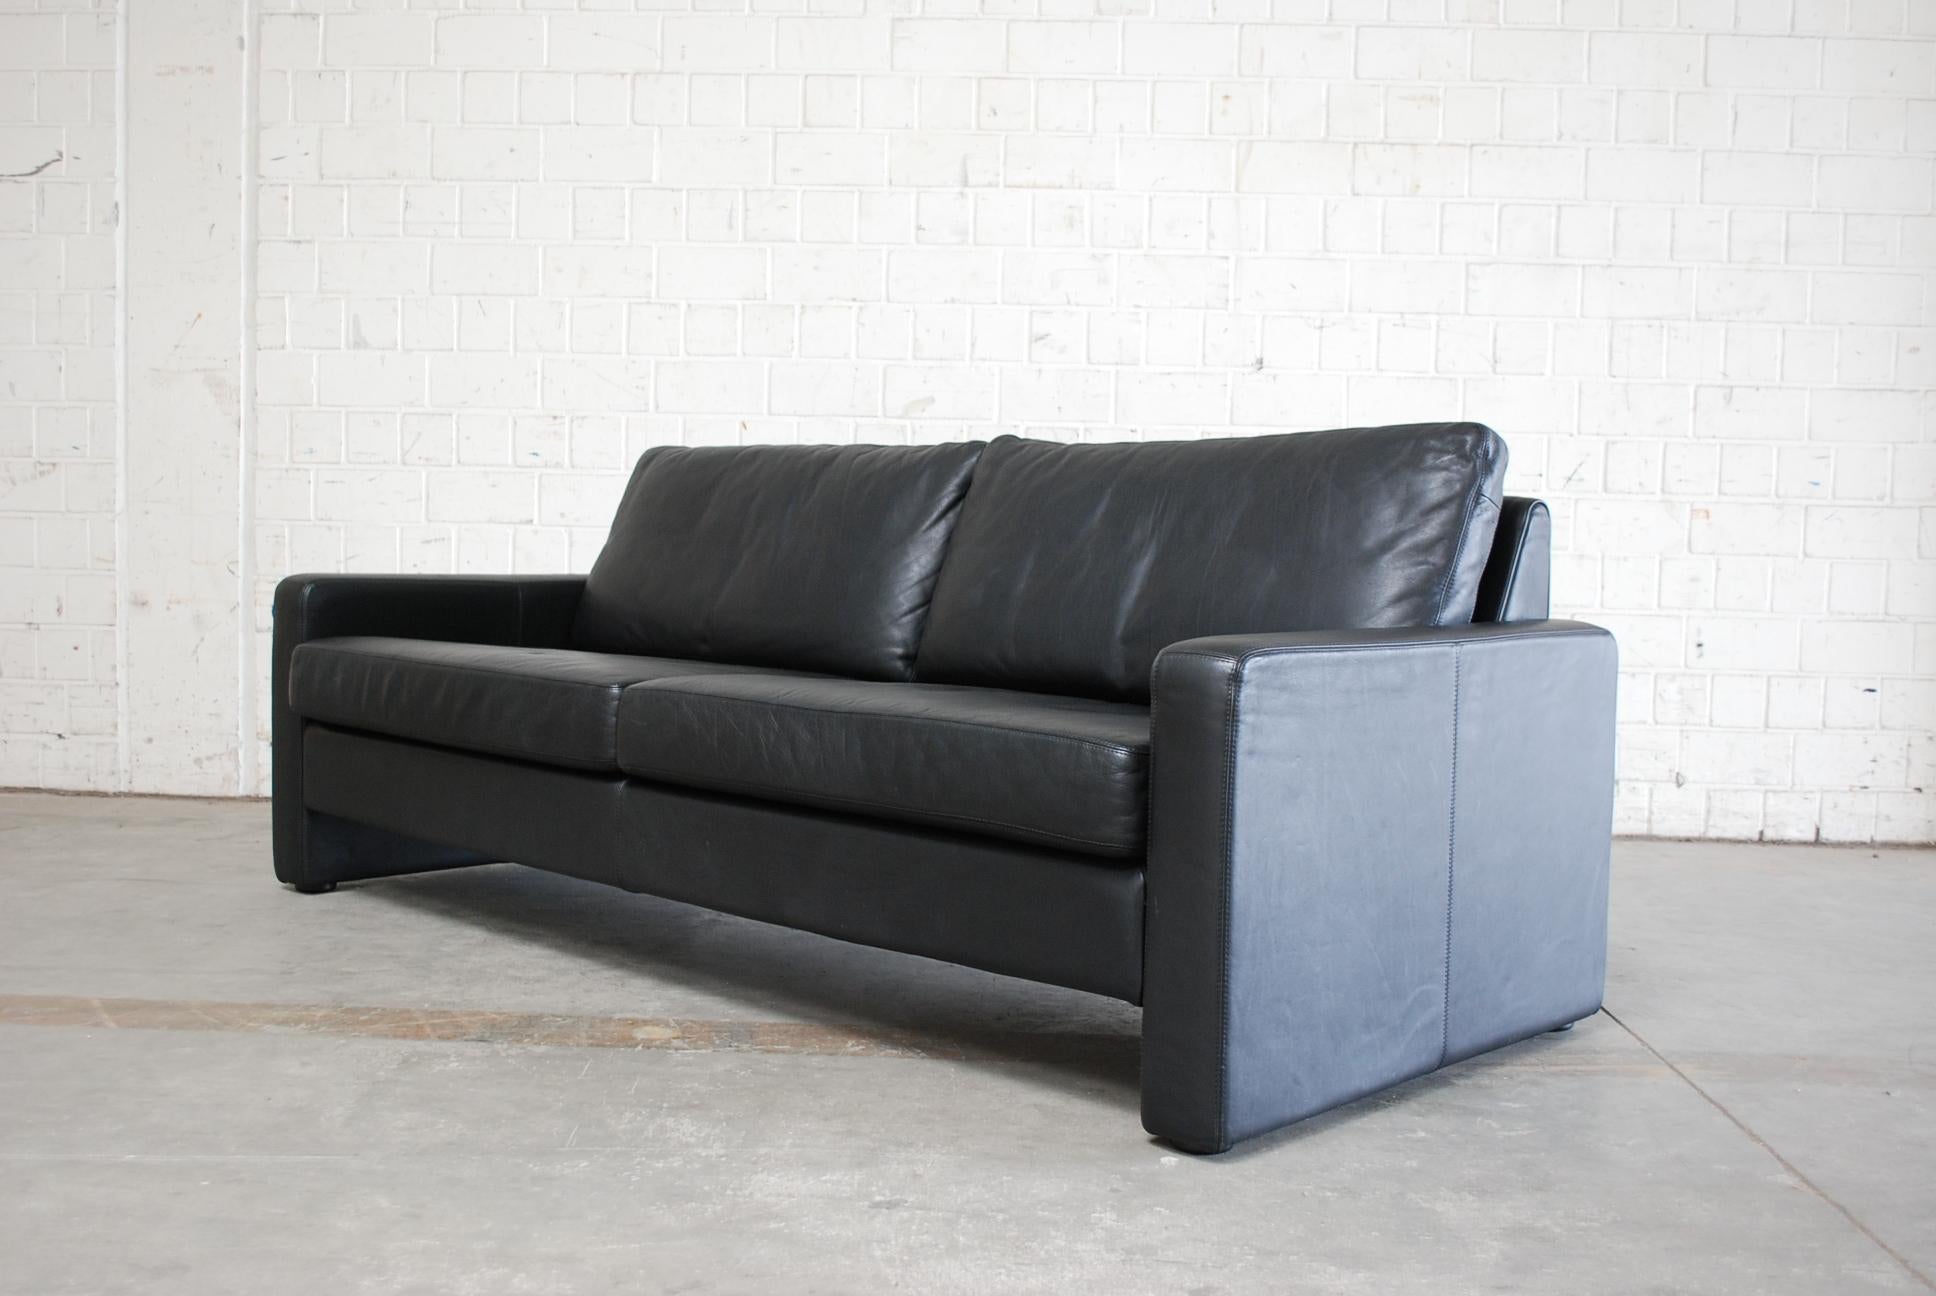 Cor leather sofa model Conseta
Back aniline leather.
Comfortable sofa with decent design.
Design by Friedrich Wilhelm Möller
A German masterpiece of functional design.

 